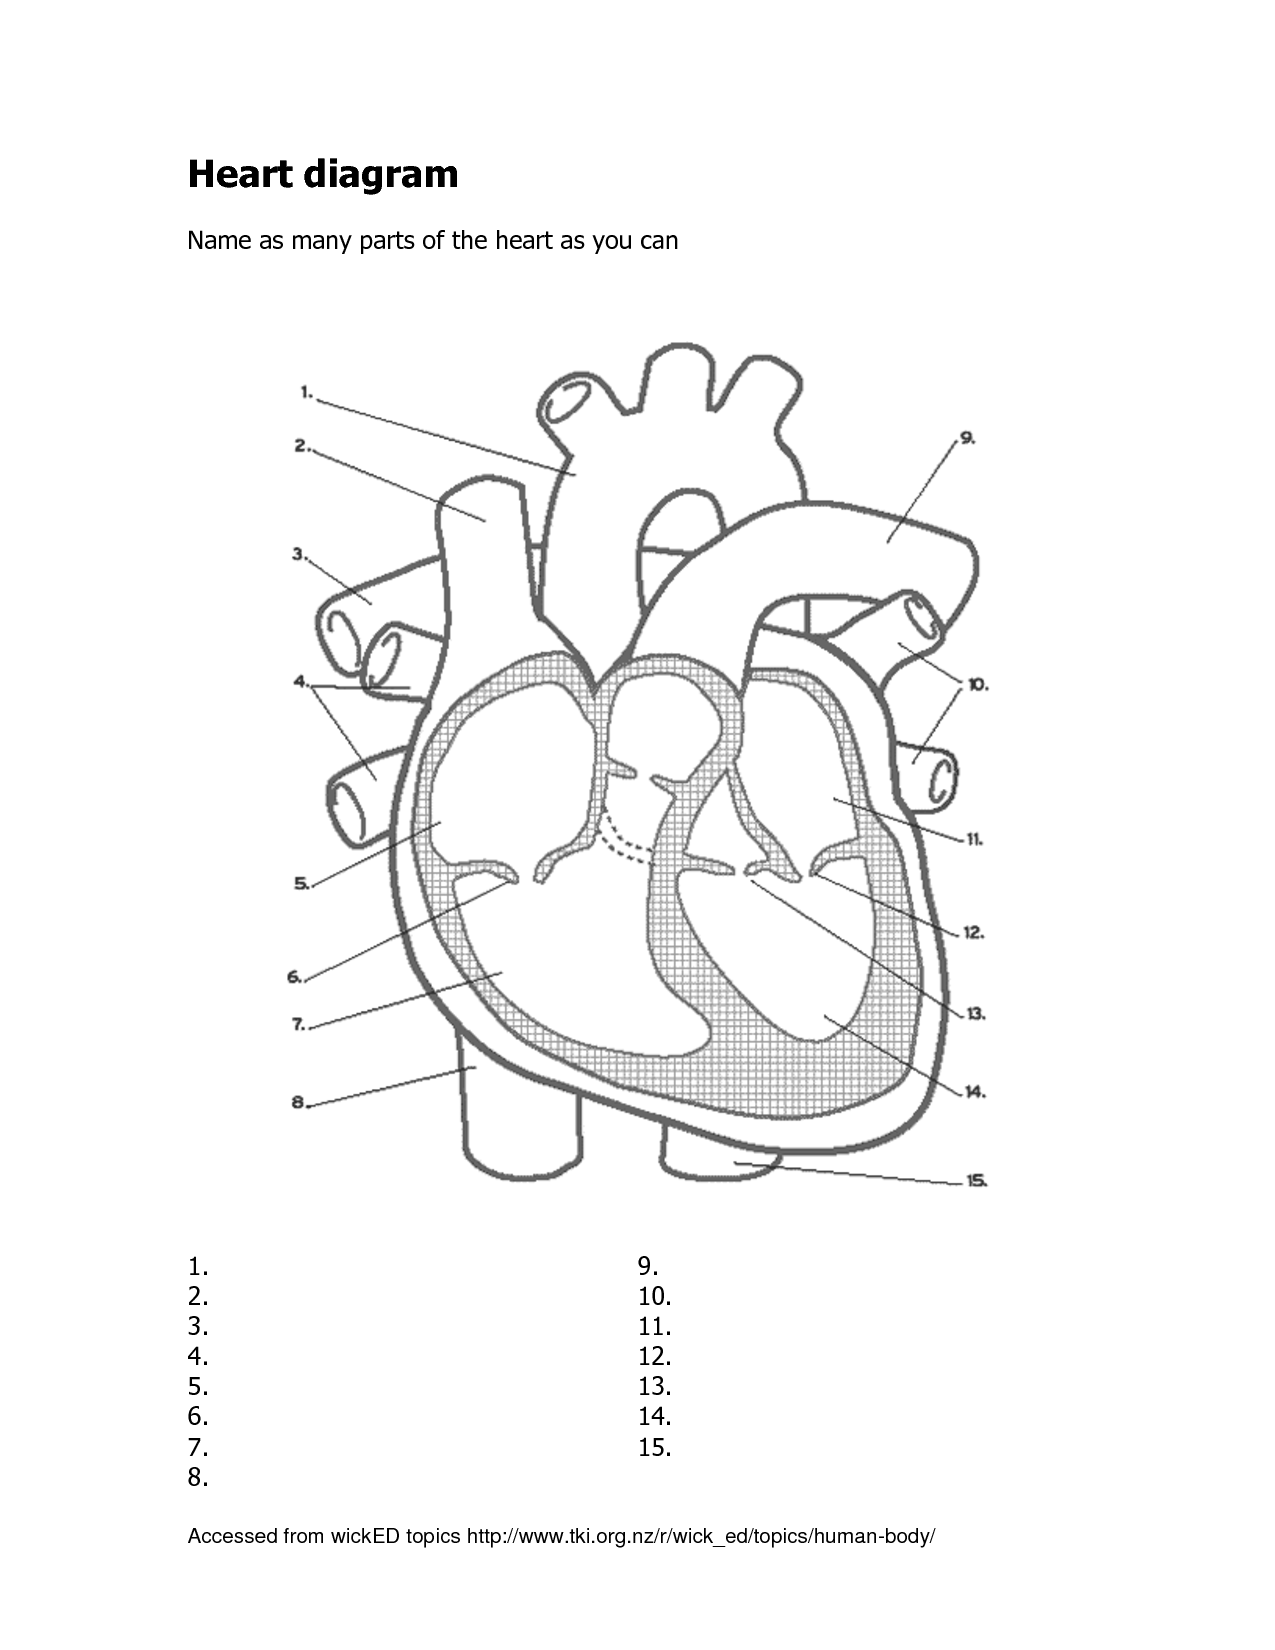 4 Best Images of Printable Heart Diagram To Label - Label ...